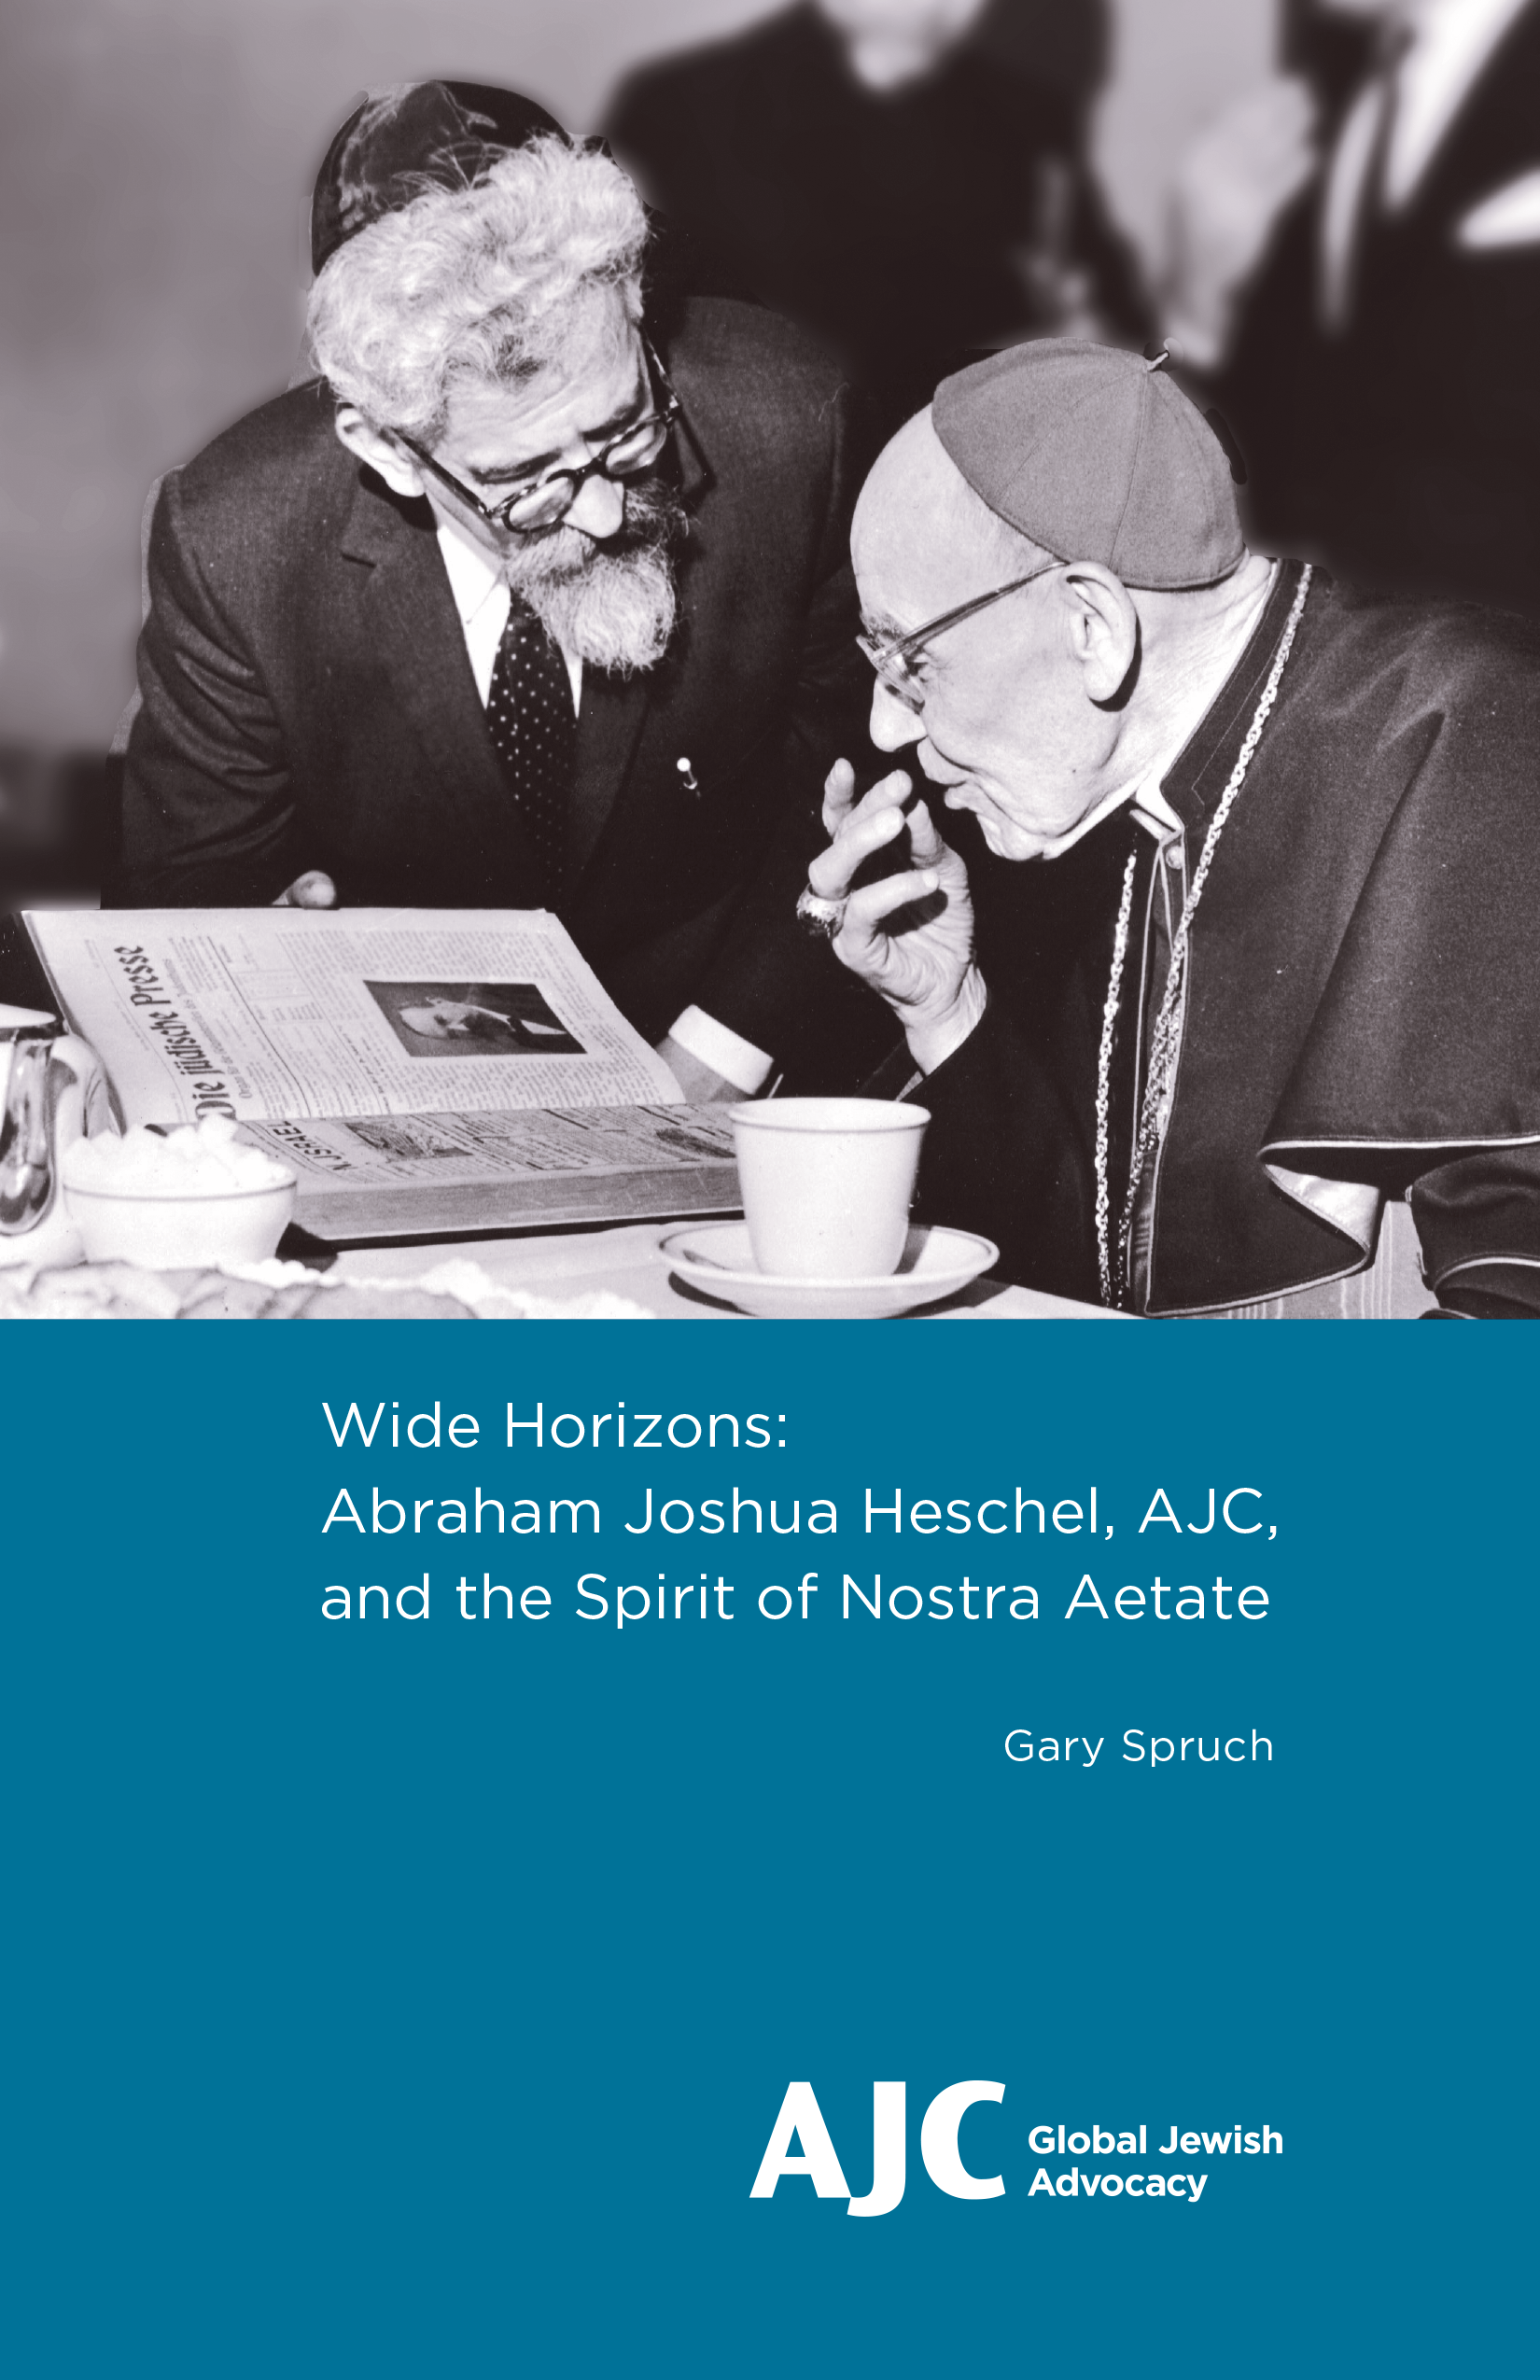 Cover of PDF - Wide Horizons: Abraham Joshua Heschel, AJC, and the Spirit of Nostra Aetate